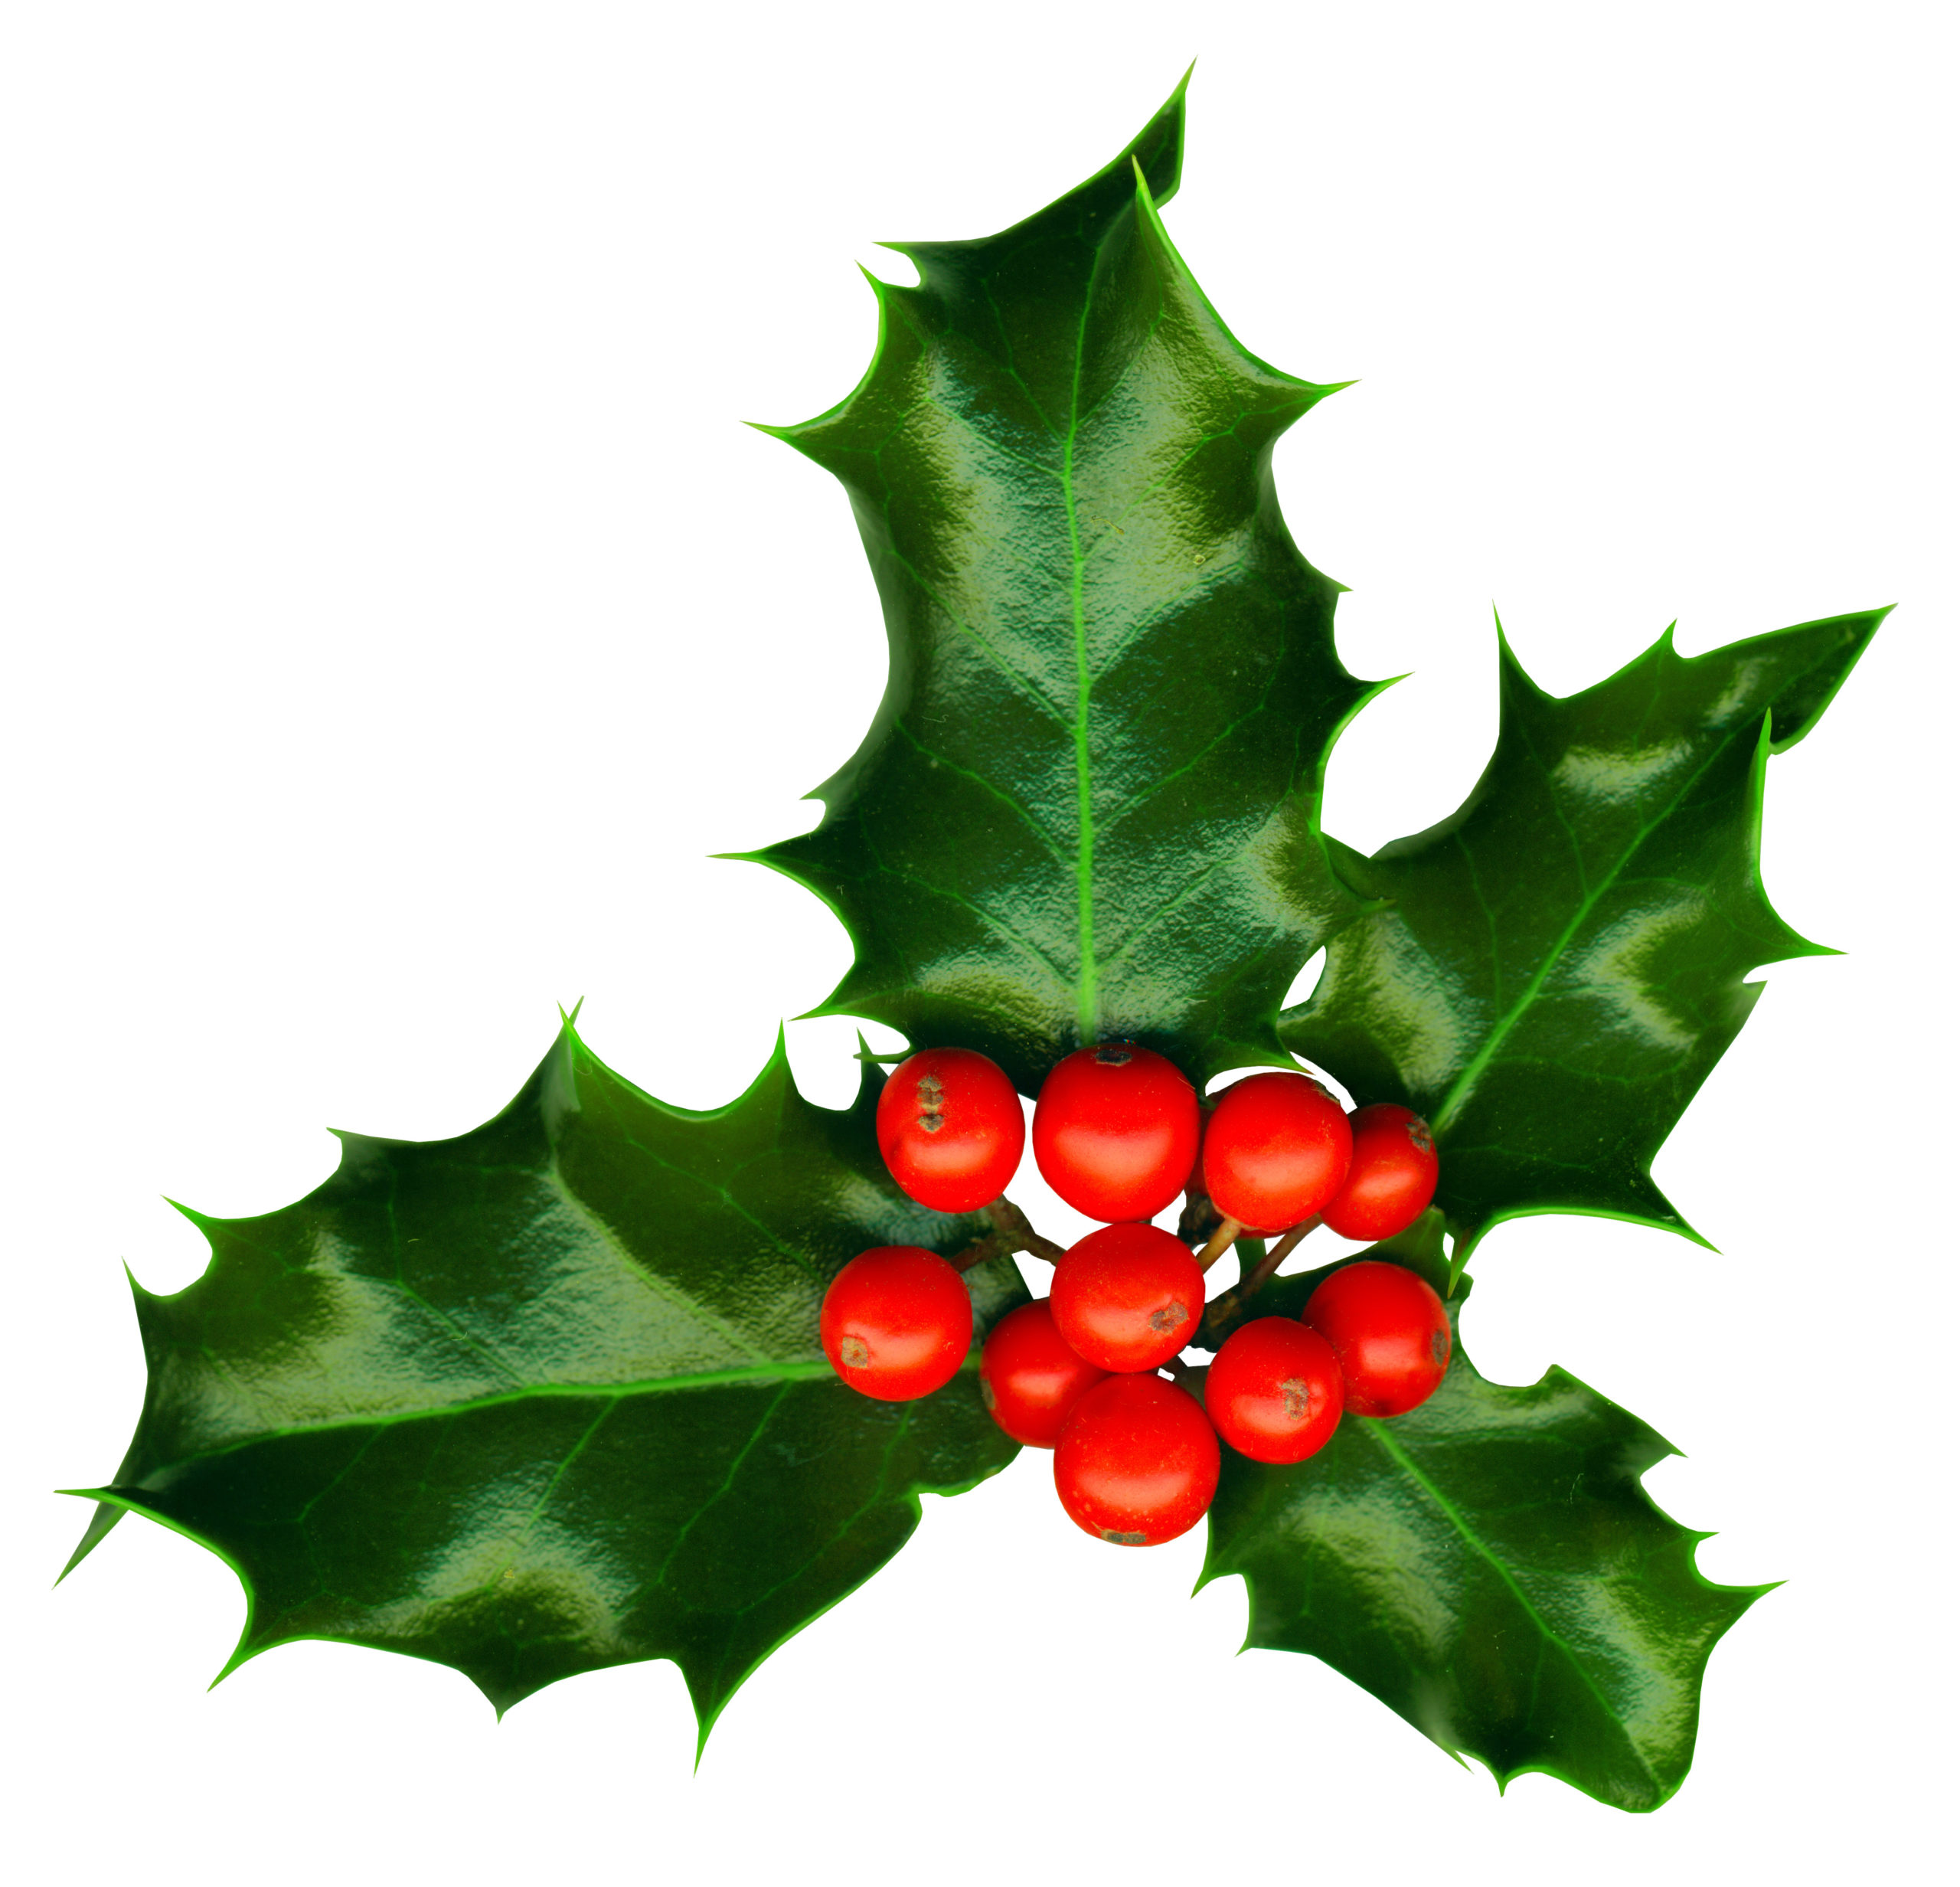 Clipping path. a sprig of holly isolated on a white background